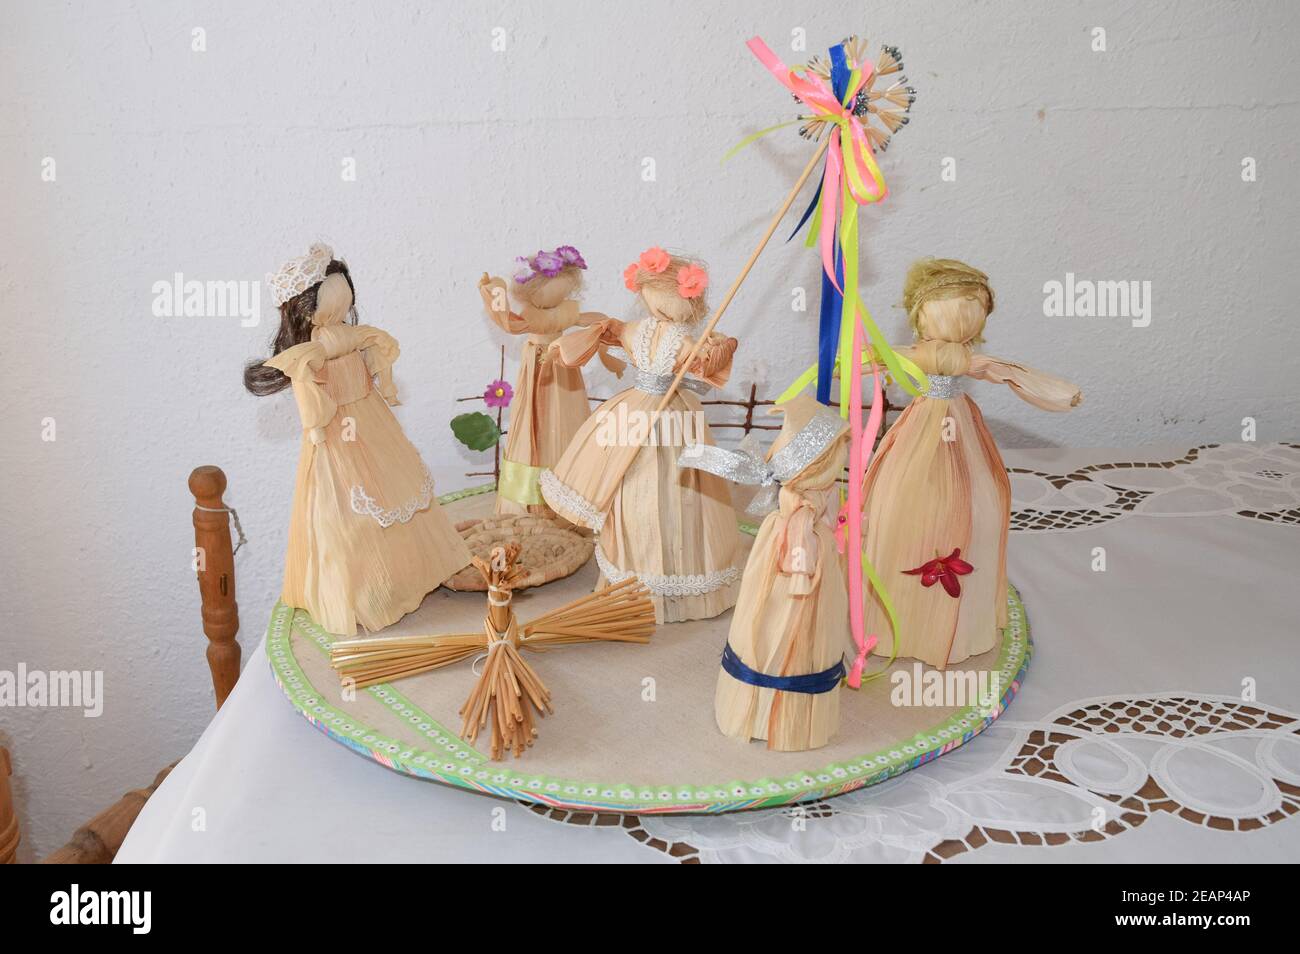 Dolls made of the skins of corn cobs Stock Photo